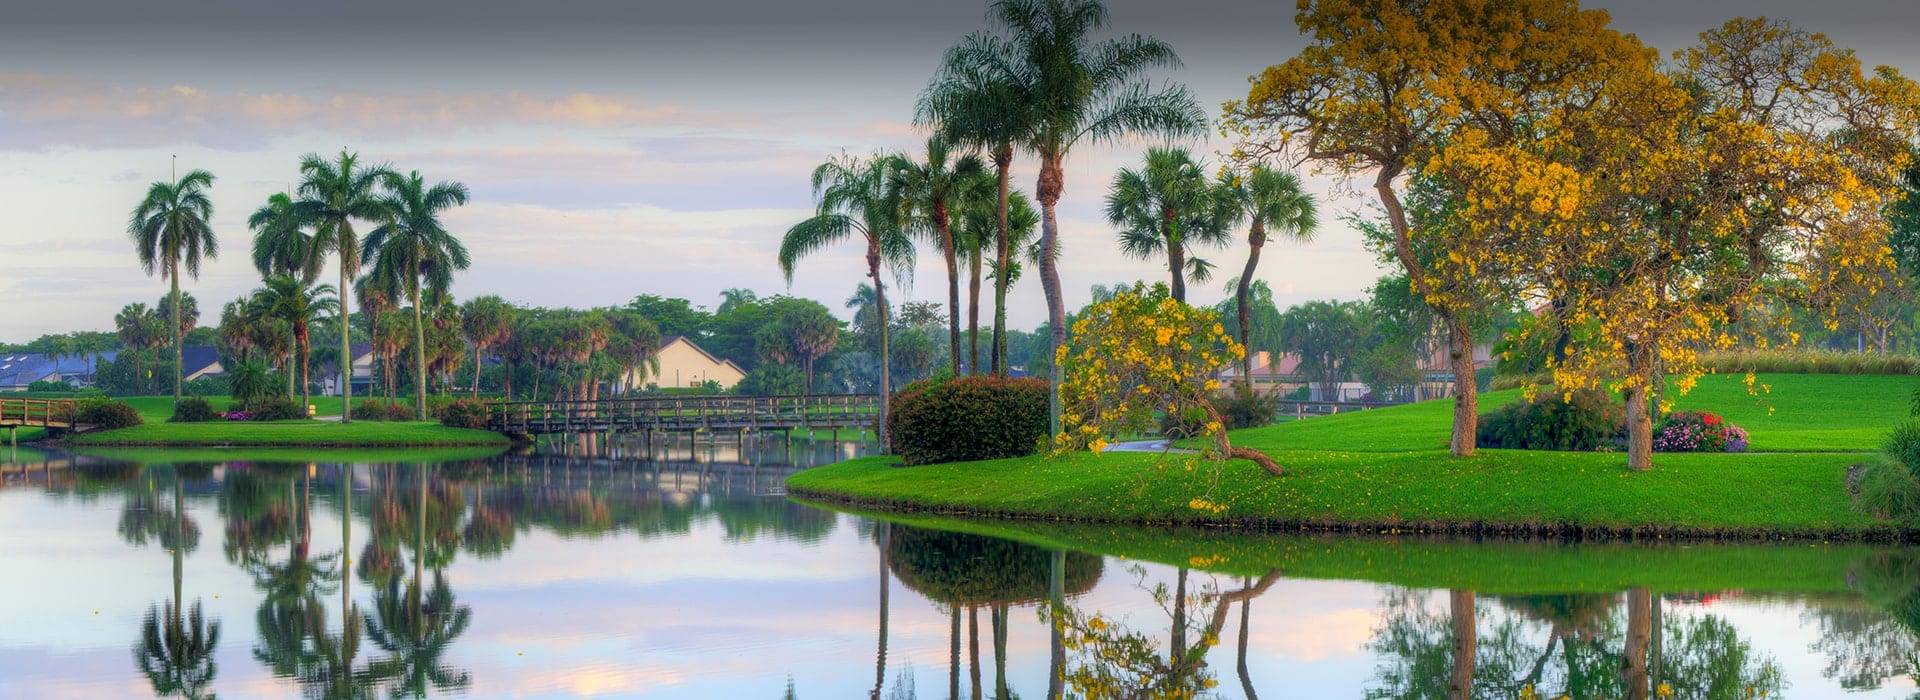 Large lake with palm trees surrounding it at Boca West